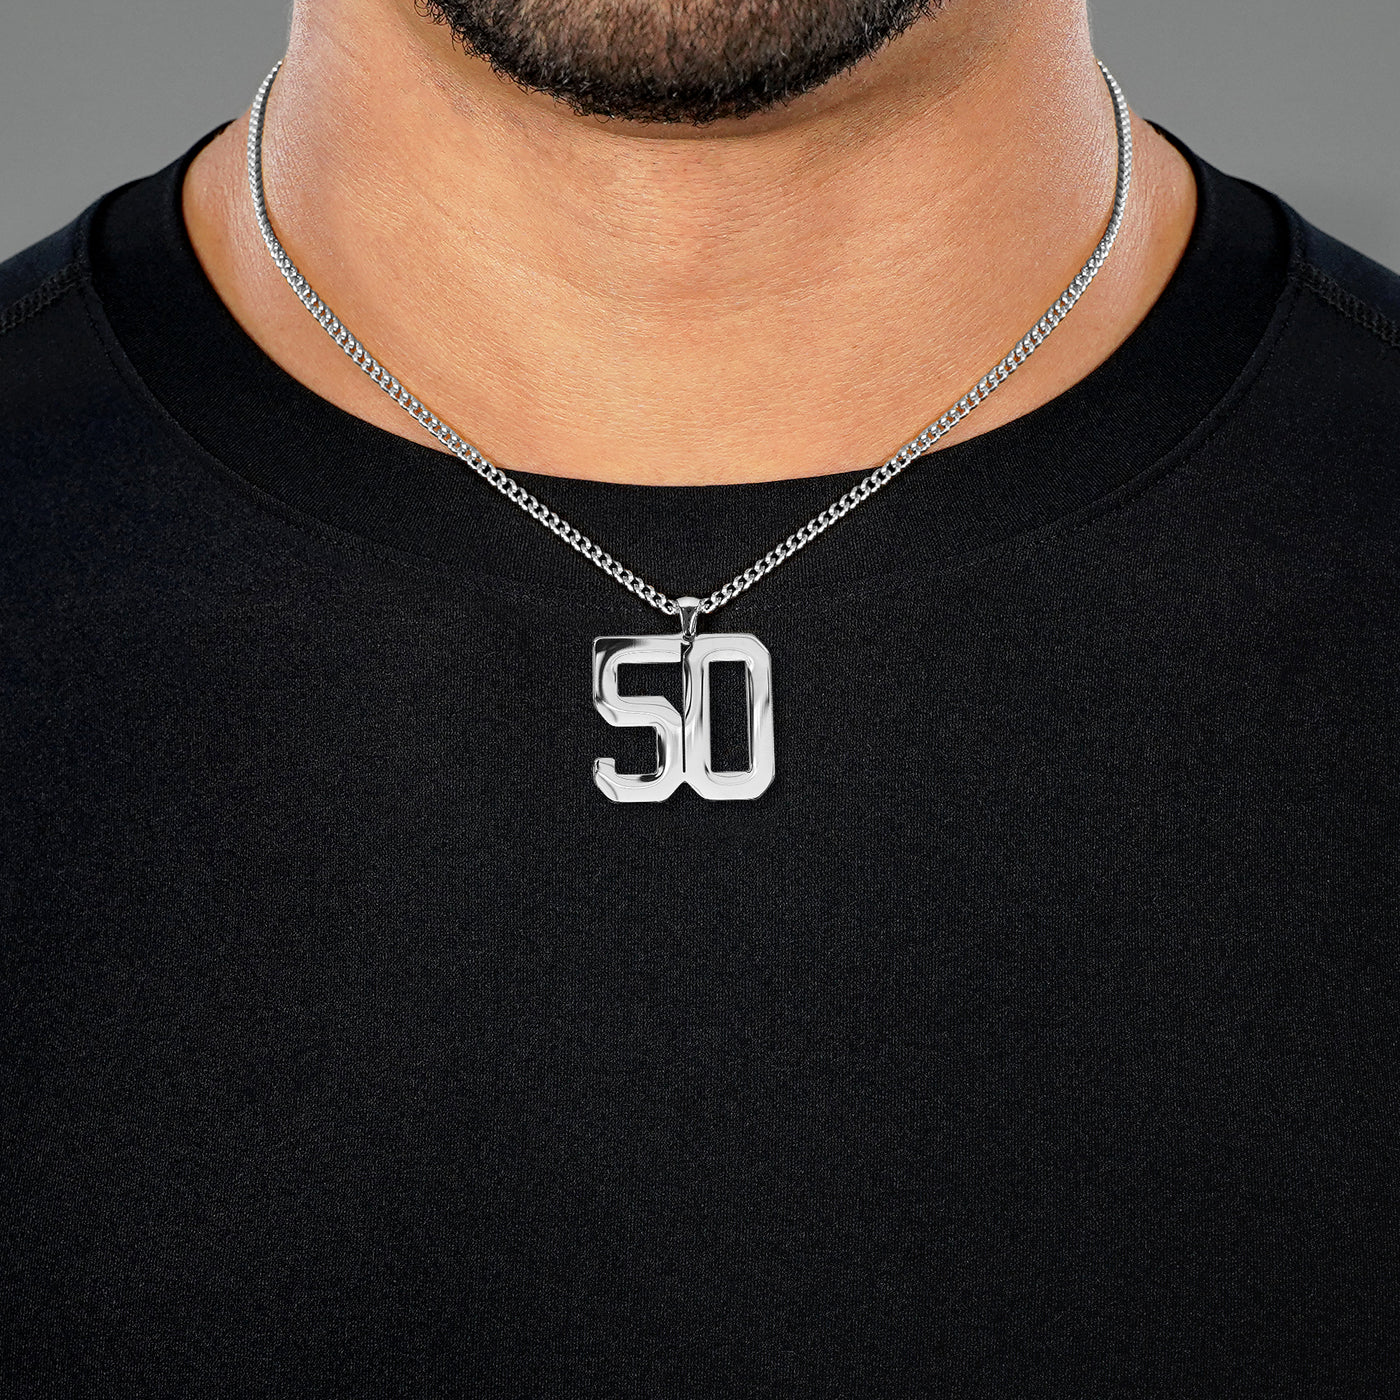 50 Number Pendant with Chain Necklace - Stainless Steel